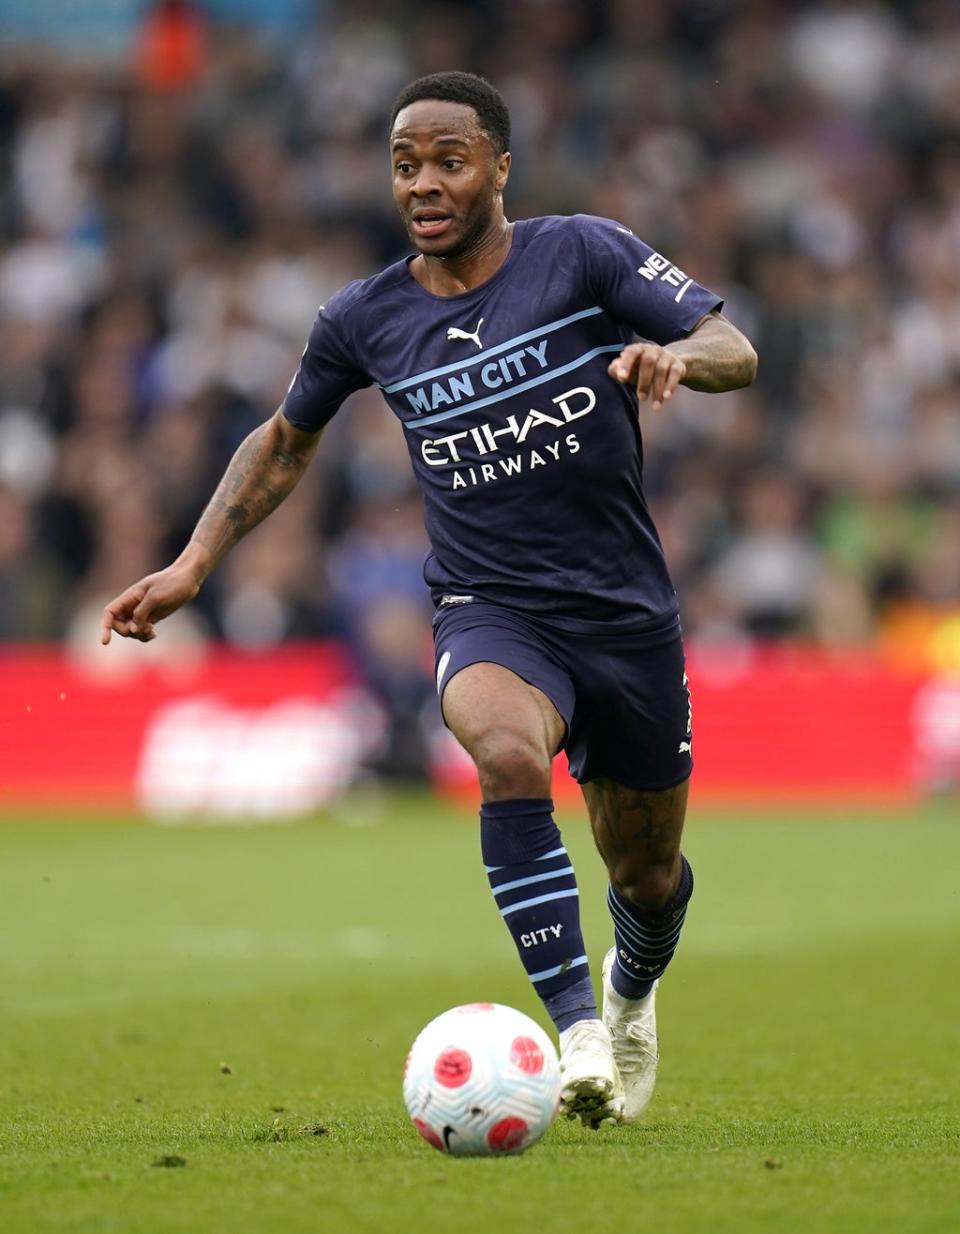 Manchester City’s Raheem Sterling has been linked to Arsenal (Danny Lawson/PA) (PA Wire)